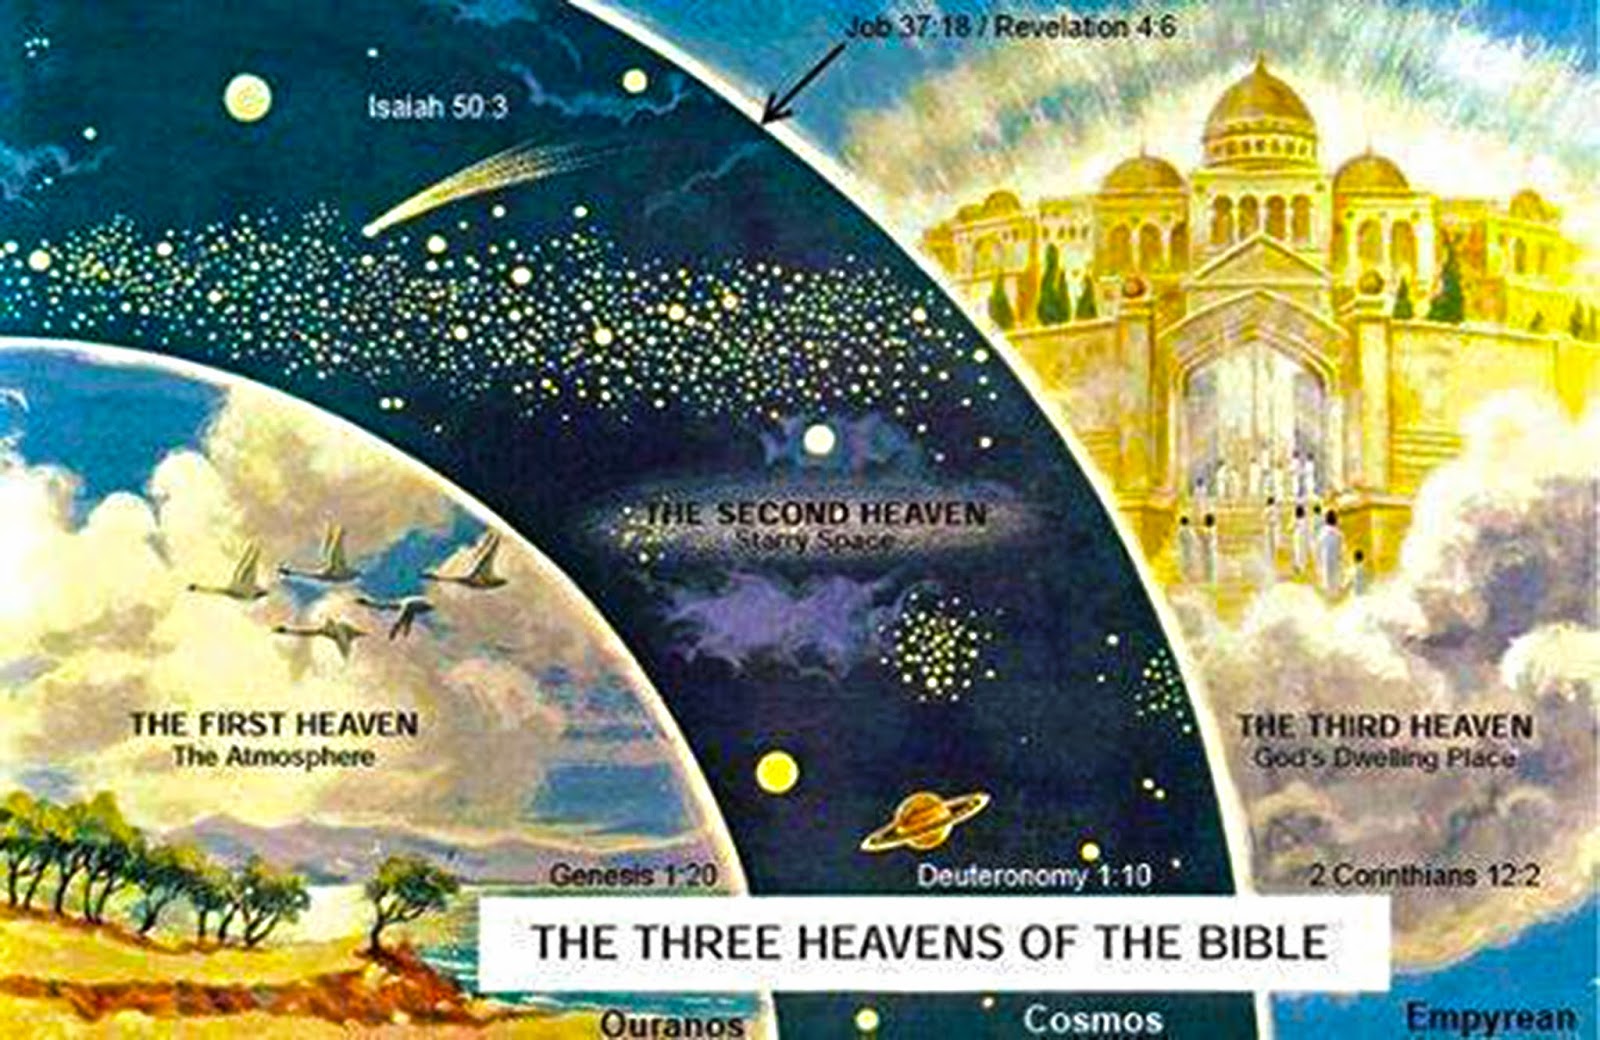 The Truth about Mormonism: The Thief went to the Third Heaven